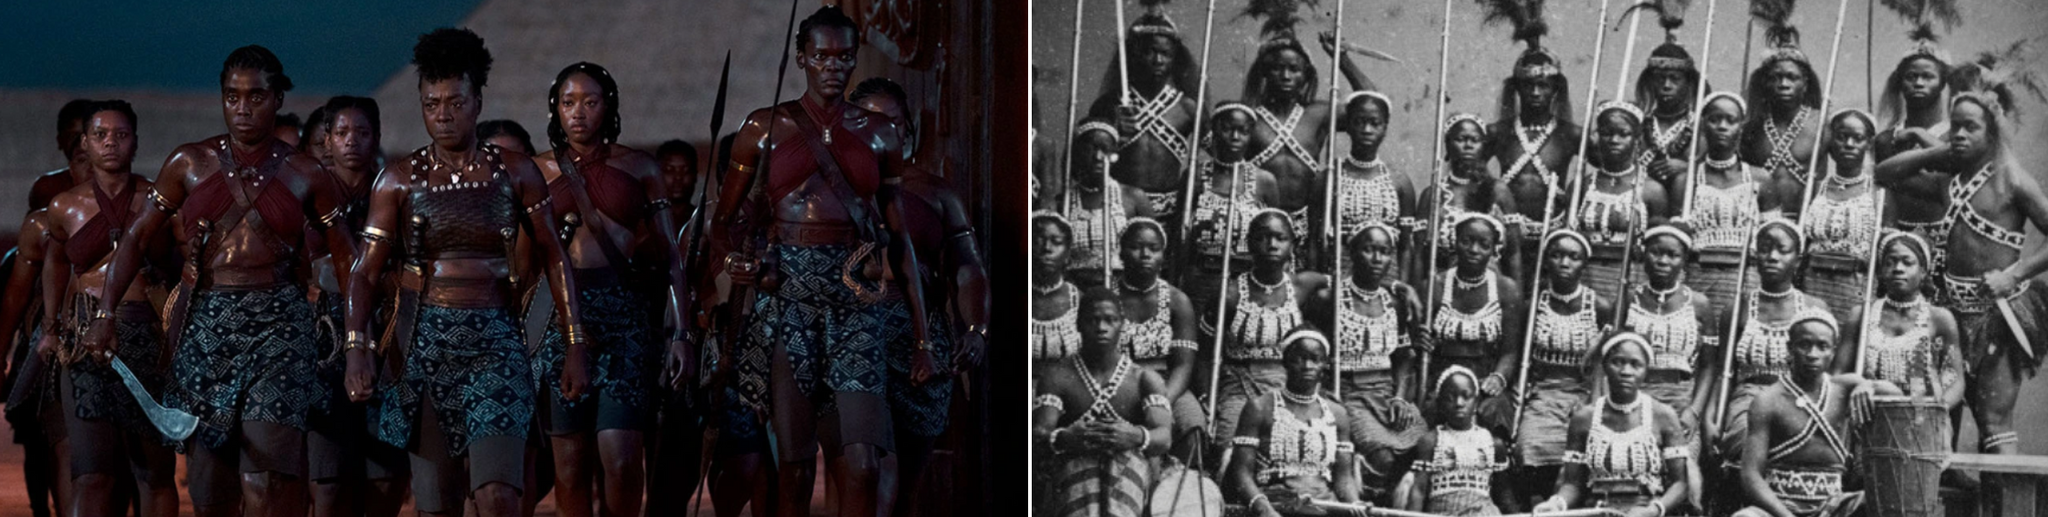 The Woman King- The story of the Dahomey warriors